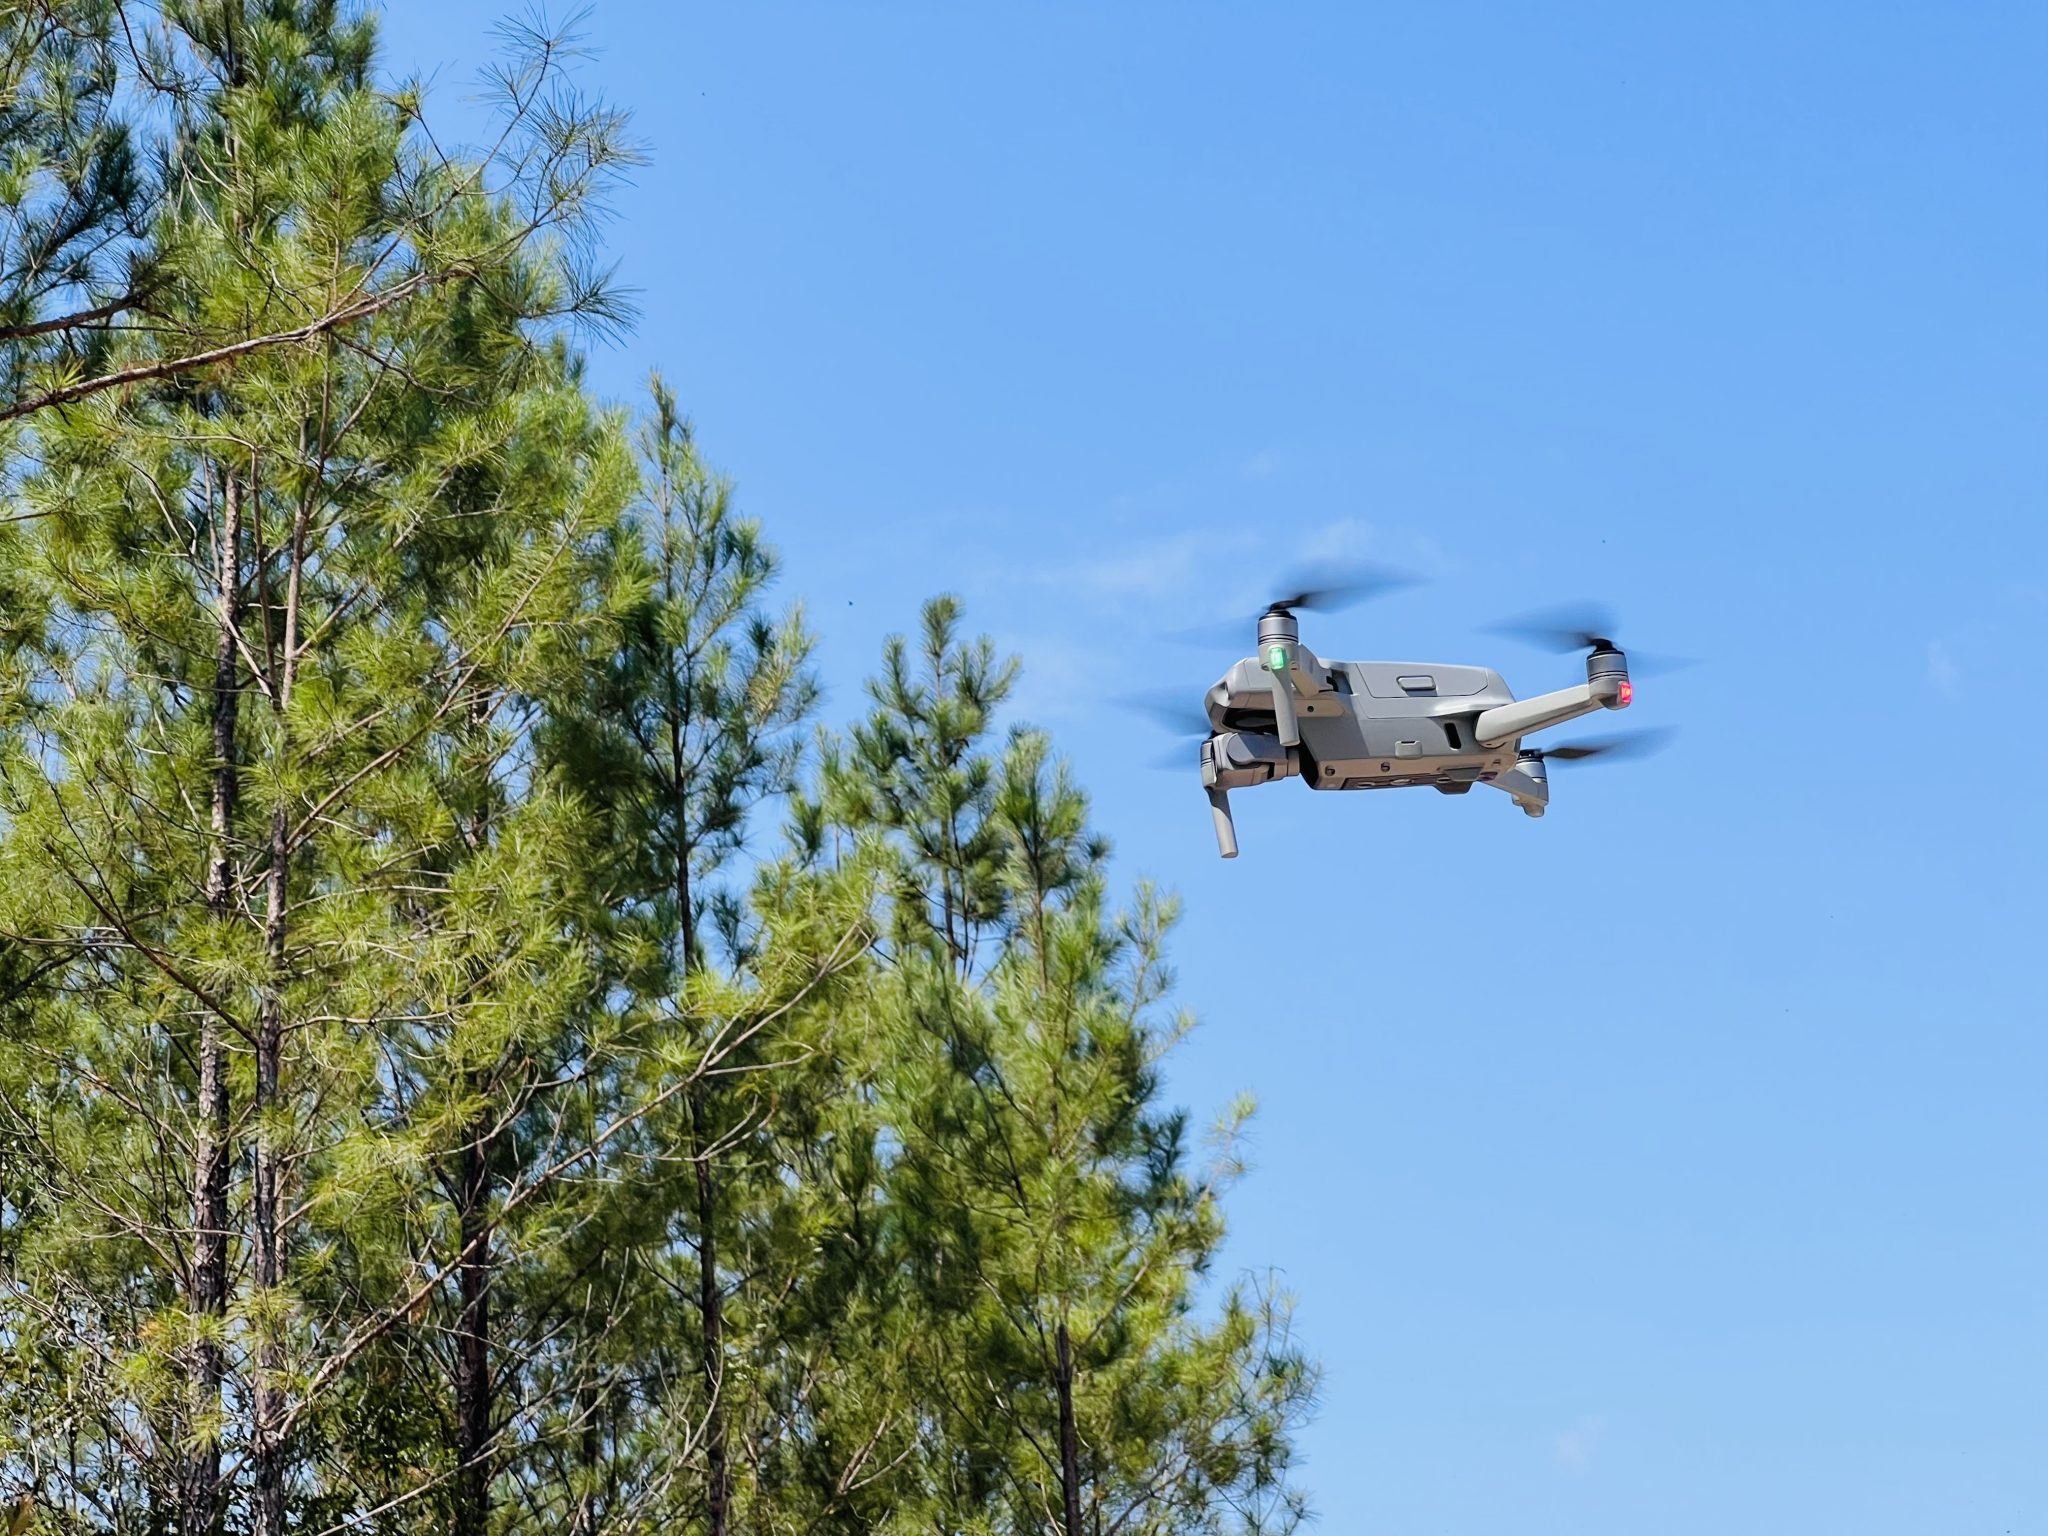 A drone flying near pine trees